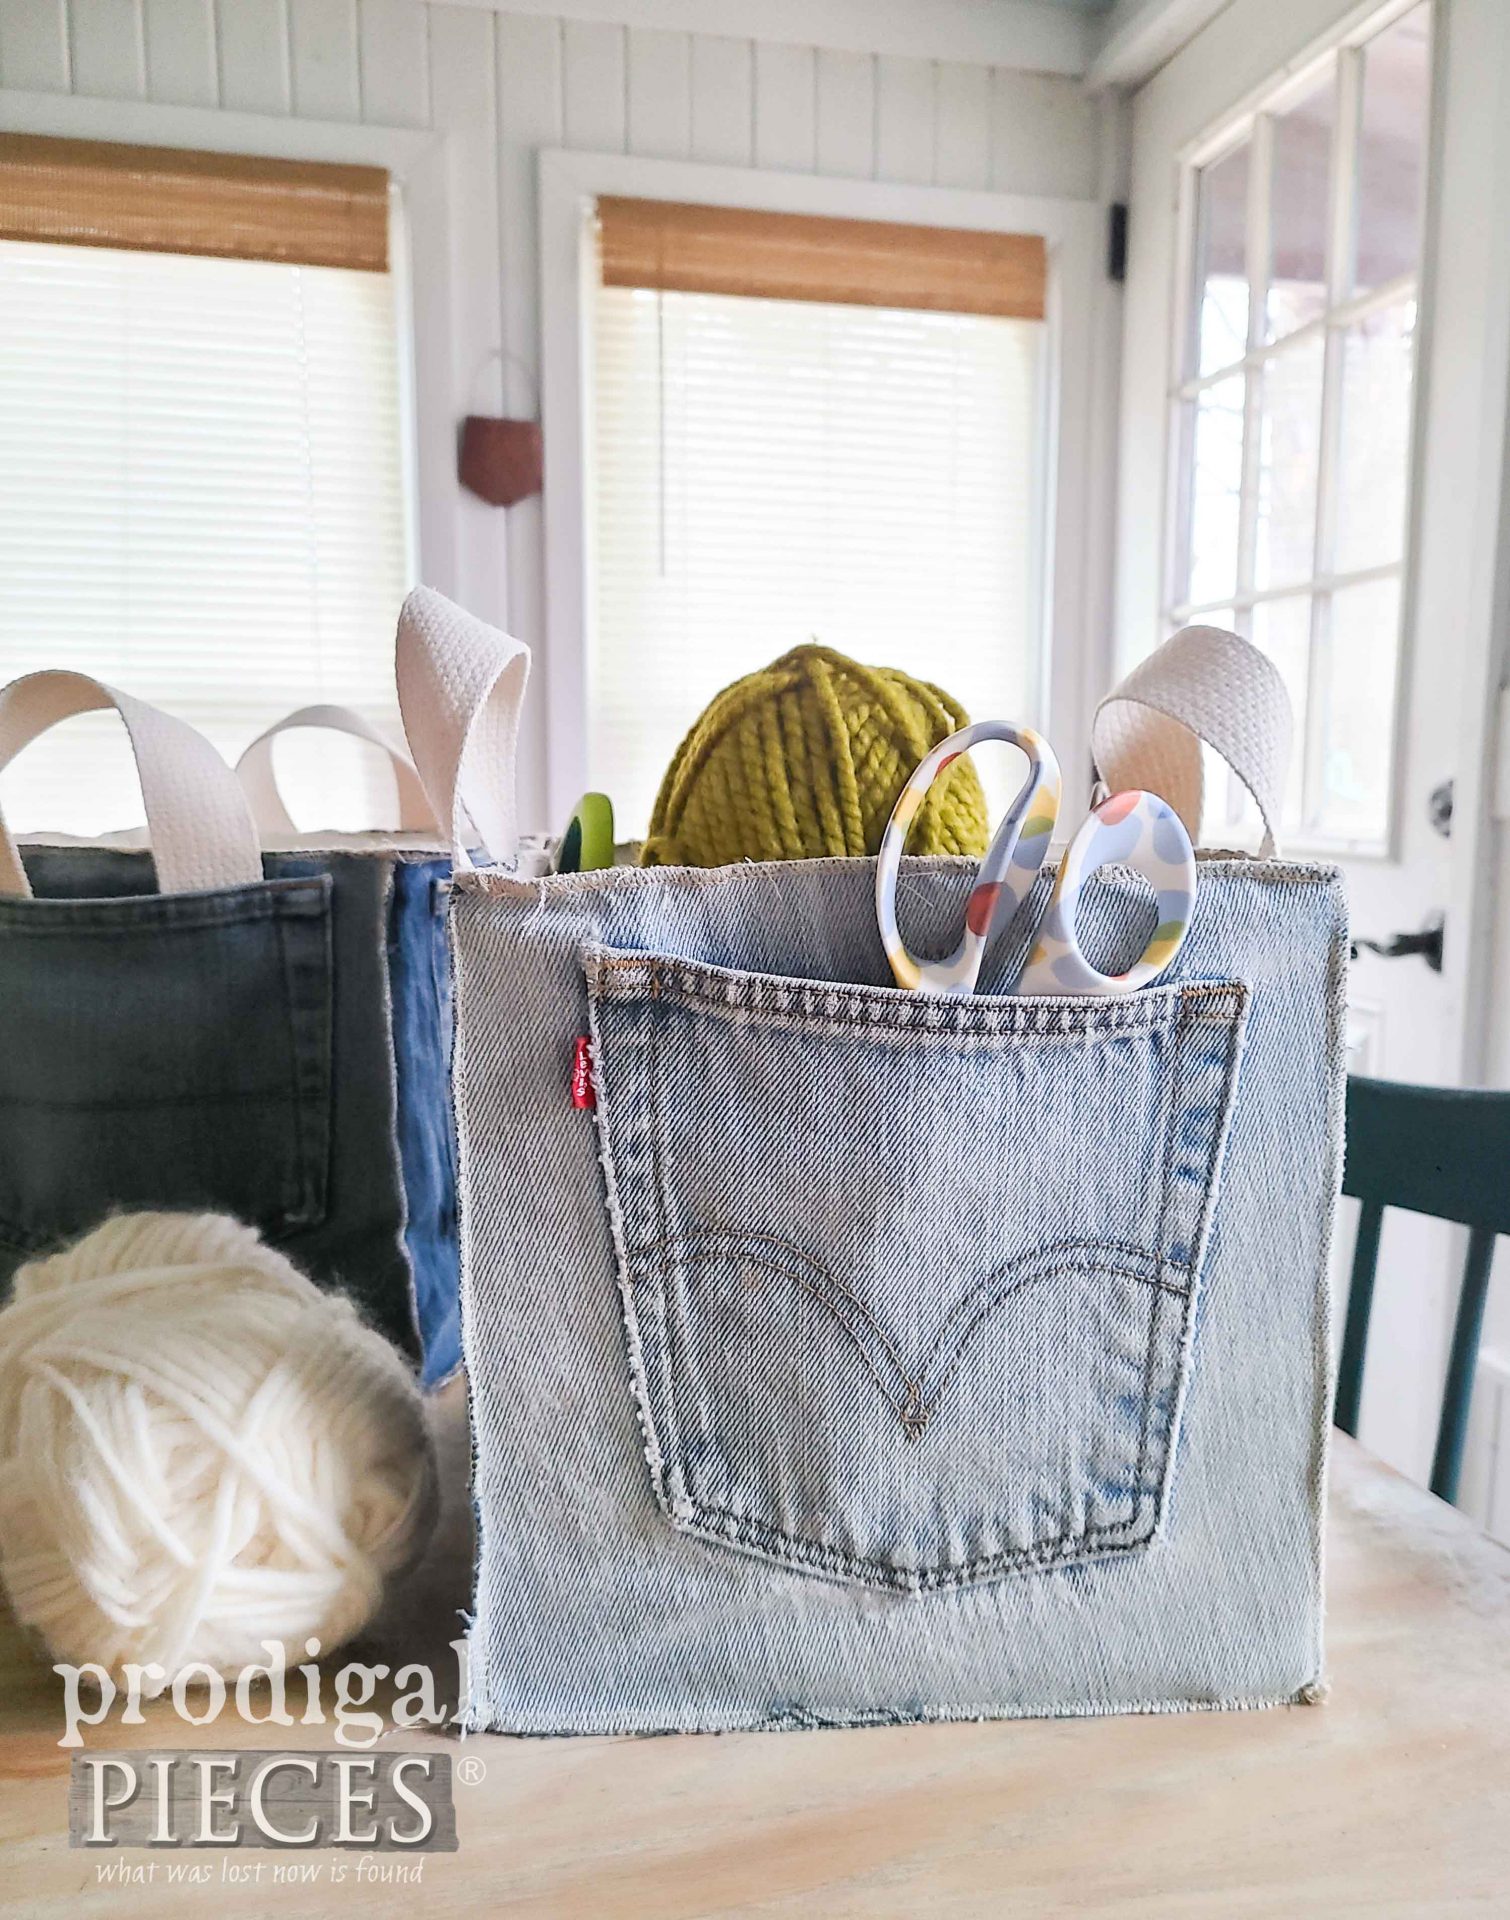 DIY Levi Upcycled Jean Storage Bucket with Tutorial by Larissa of Prodigal Pieces | prodigalpieces.com #prodigalpieces #diy #upcycled #handmade #home #storage